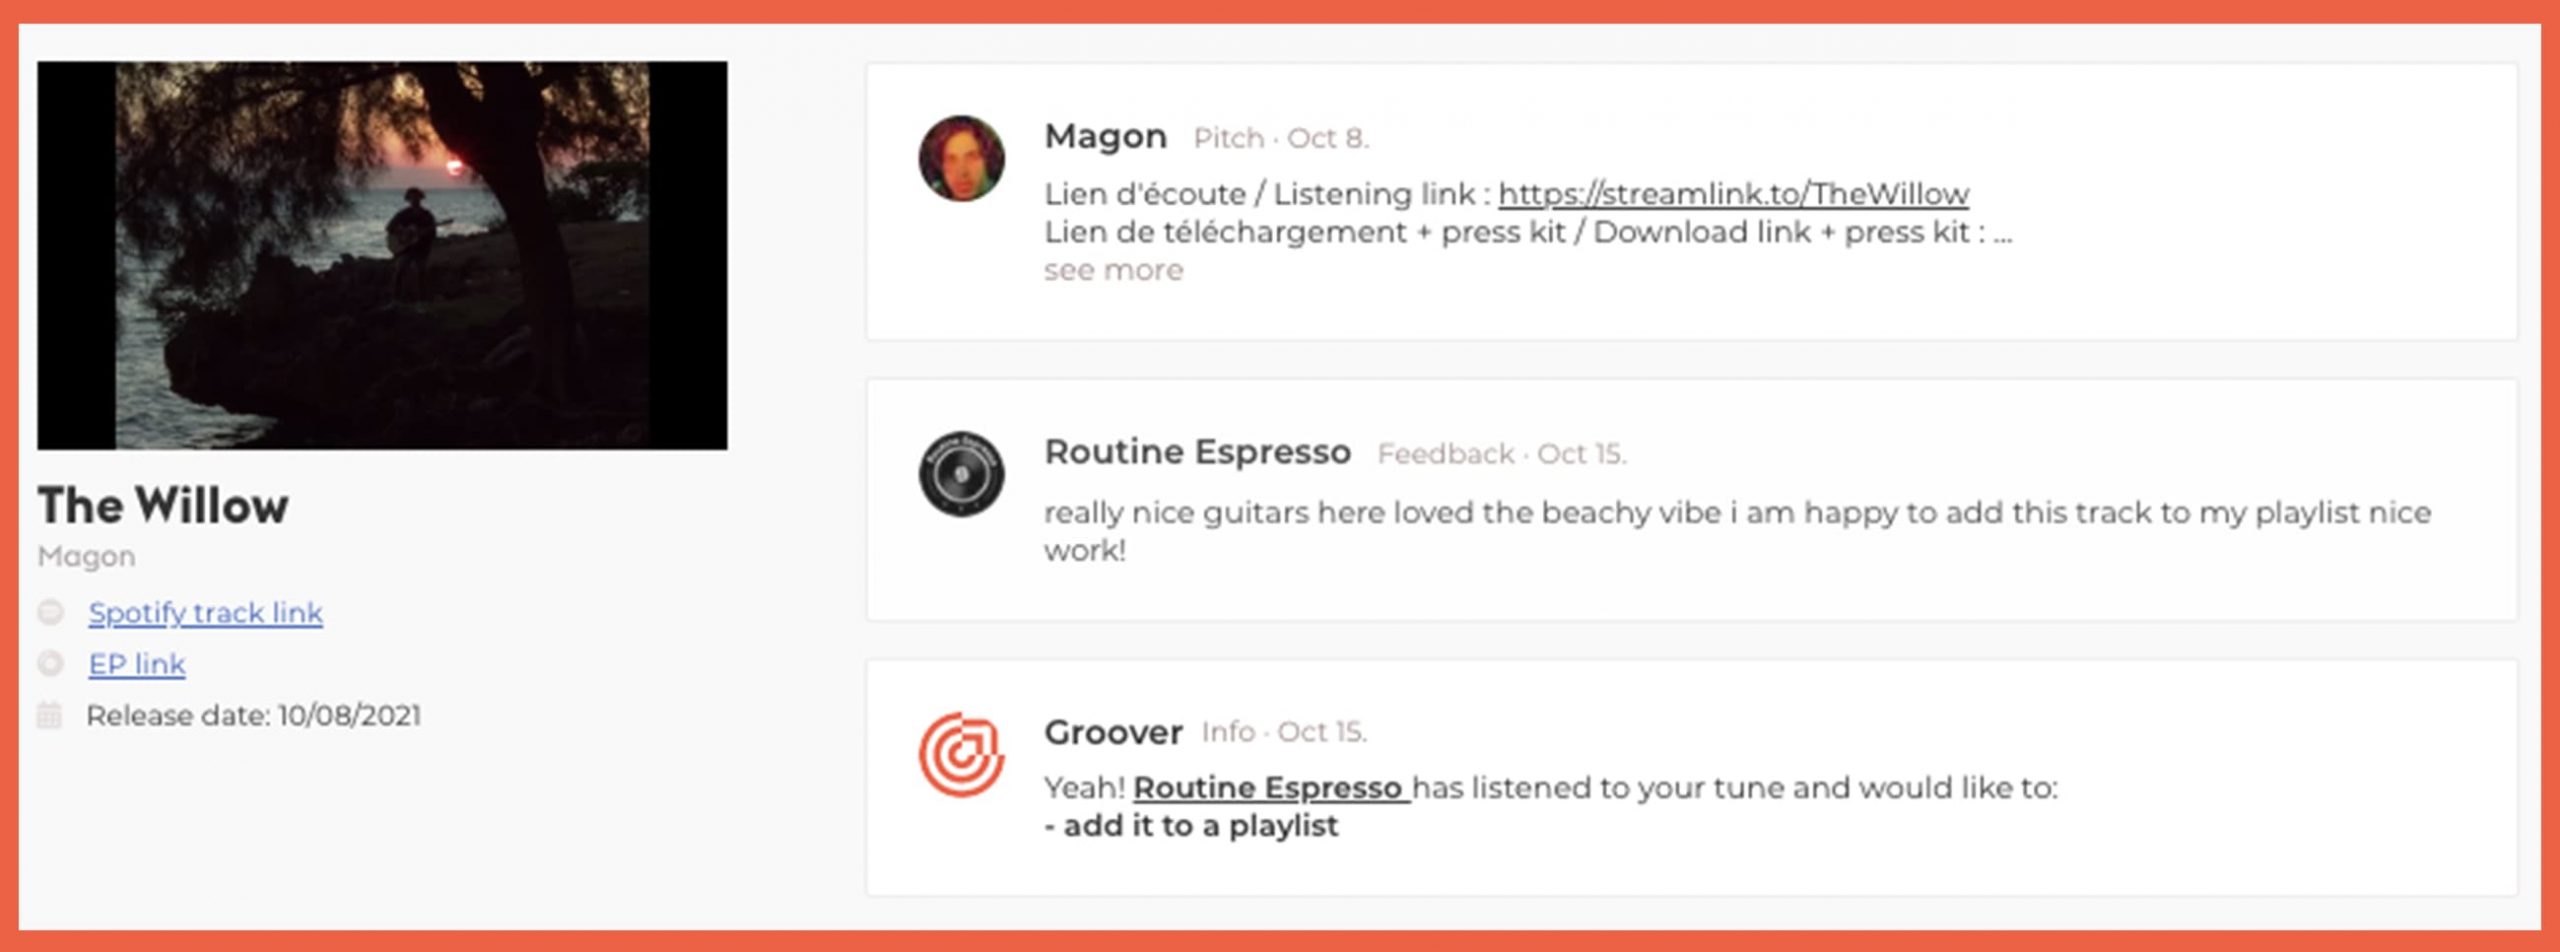 Example of feedback from Groover - the music promotion platform that allows you to receive feedback from music pros, with the opportunity to share.